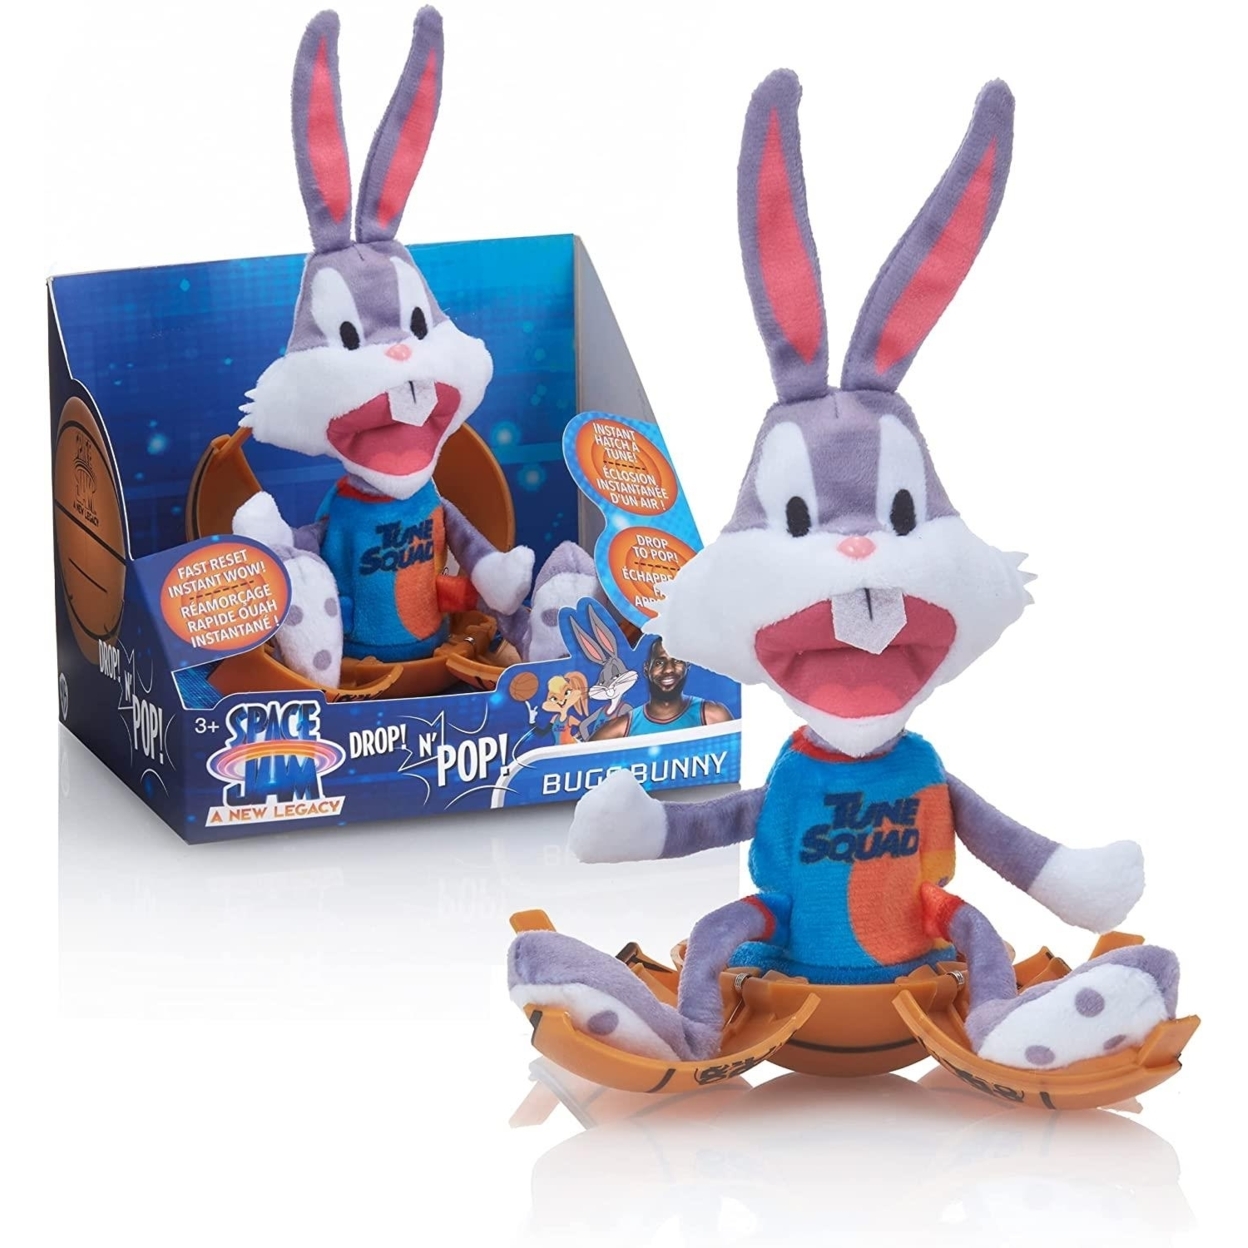 Space Jam A New Legacy Bugs Bunny Plush Drop 'n Pop Basketball Kids Interactive Toy WOW! Stuff